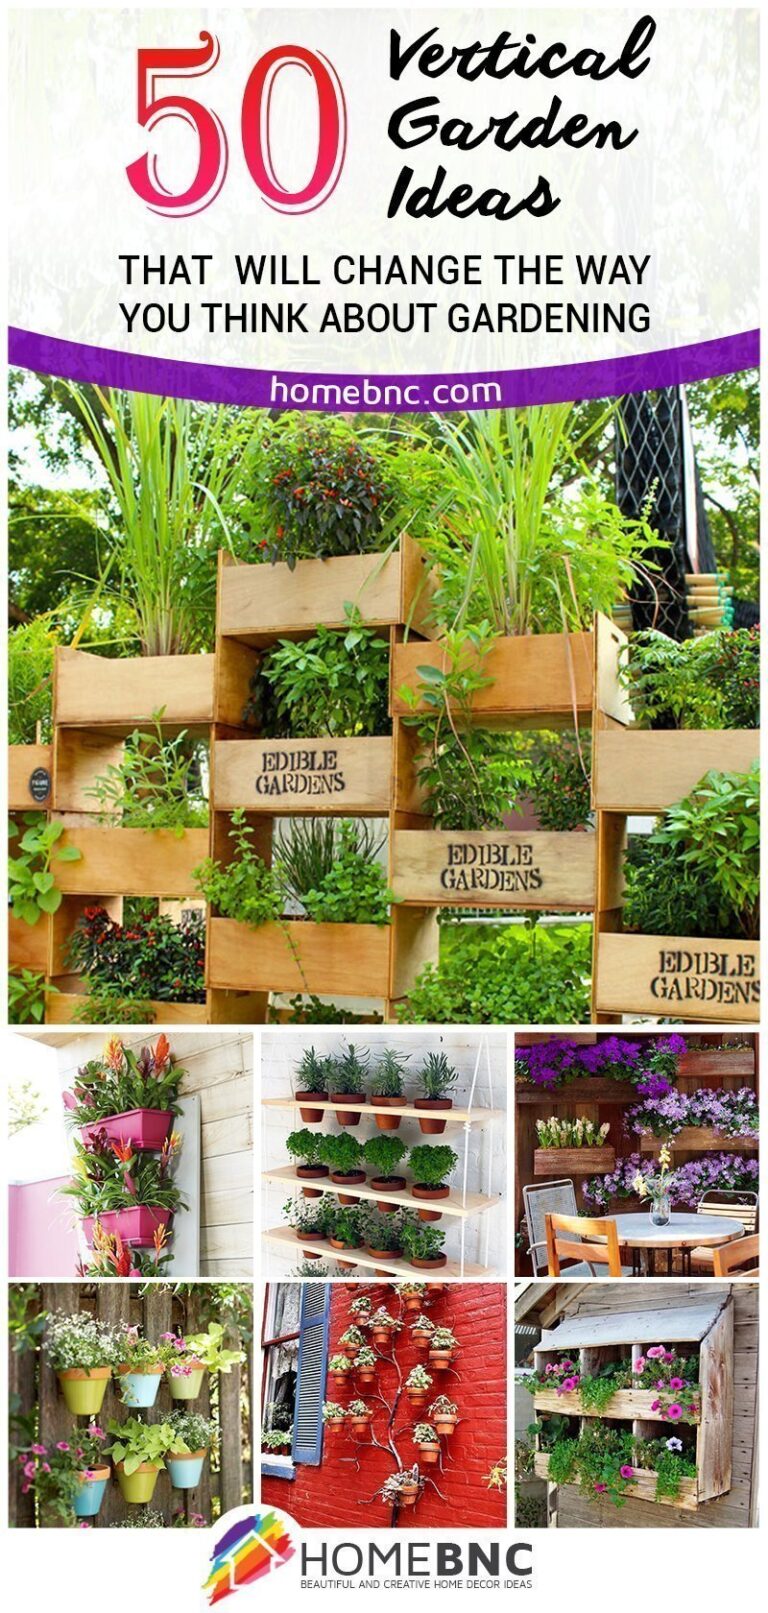 The 50 Best Vertical Garden Ideas and Designs for 2023